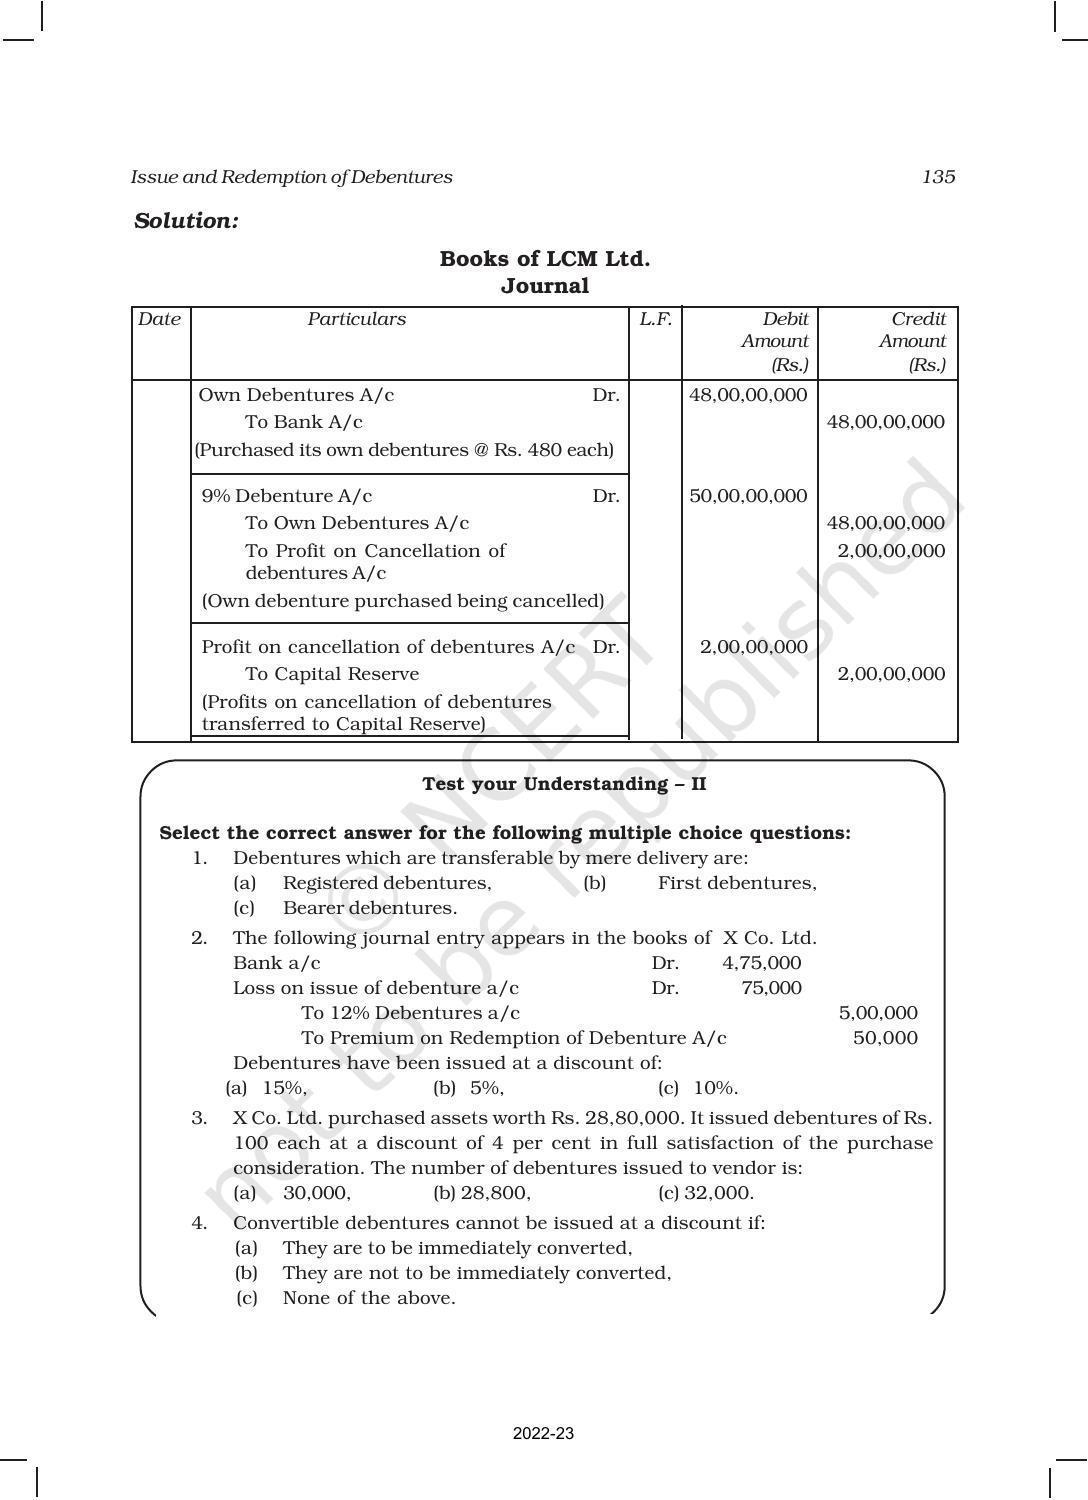 NCERT Book for Class 12 Accountancy Part II Chapter 1 Issue and Redemption of Debentures - Page 61